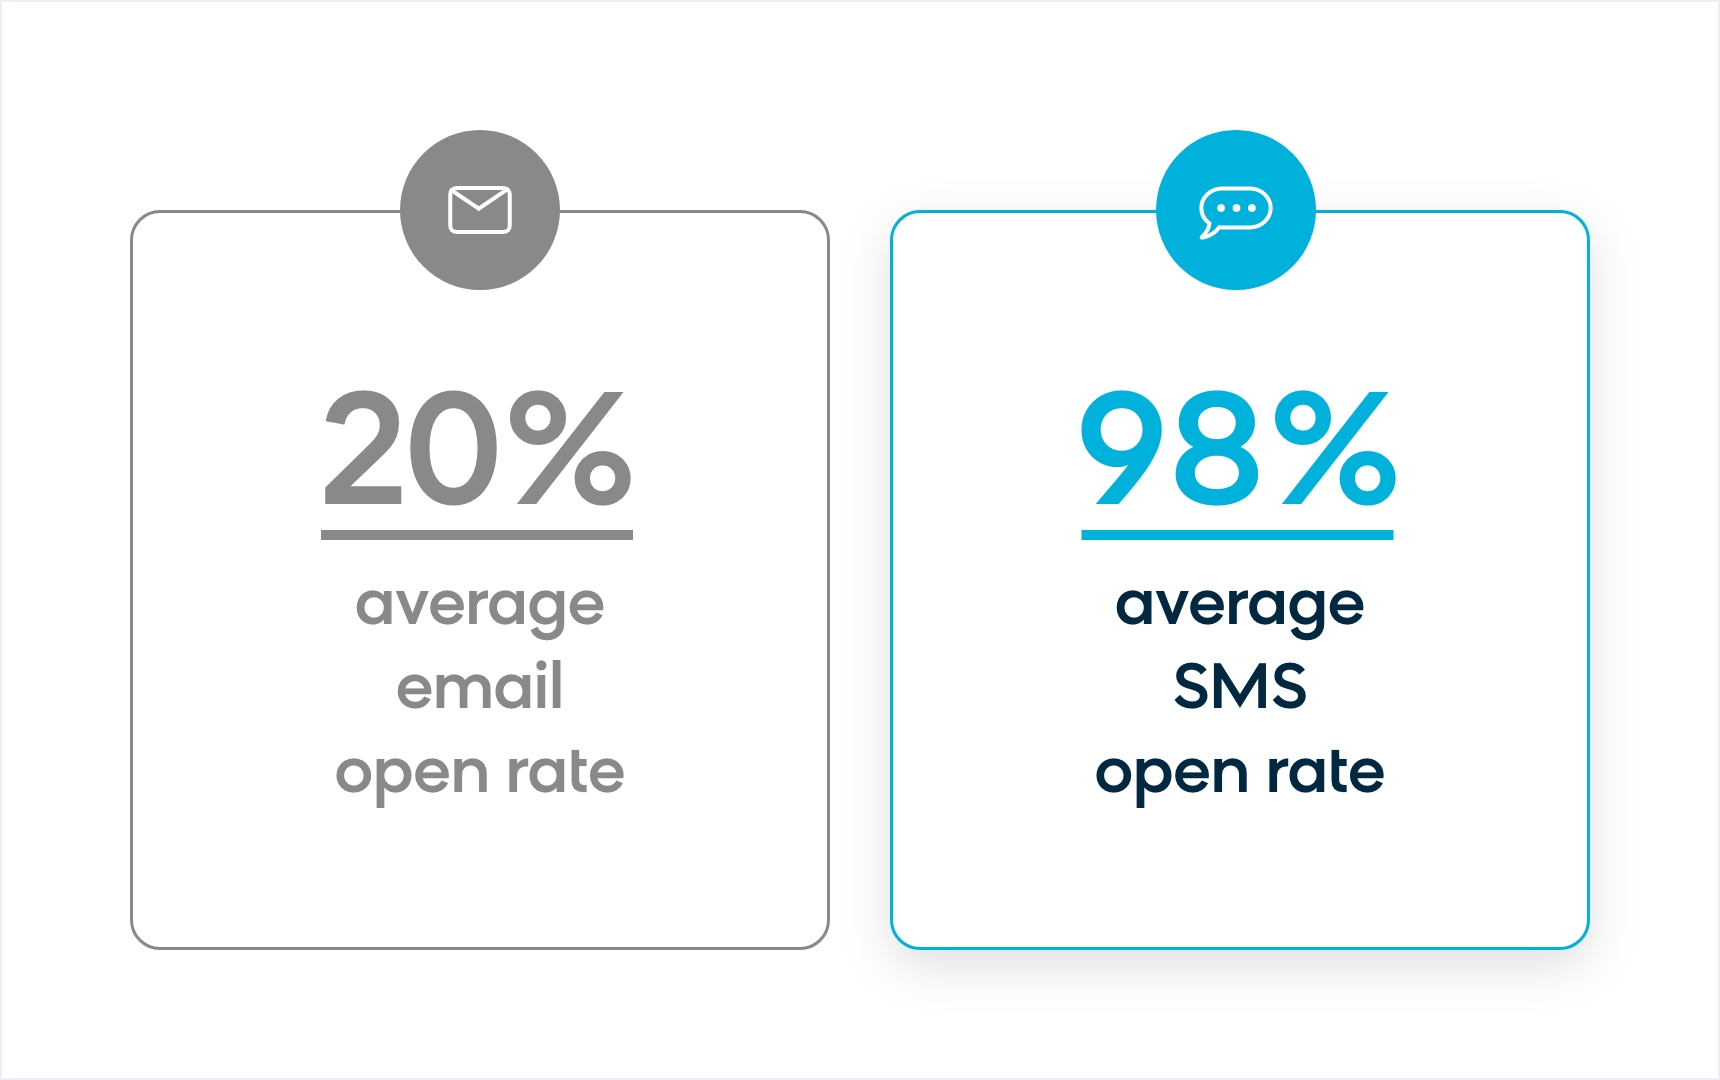 SMS marketing has an average open rate of 98%.